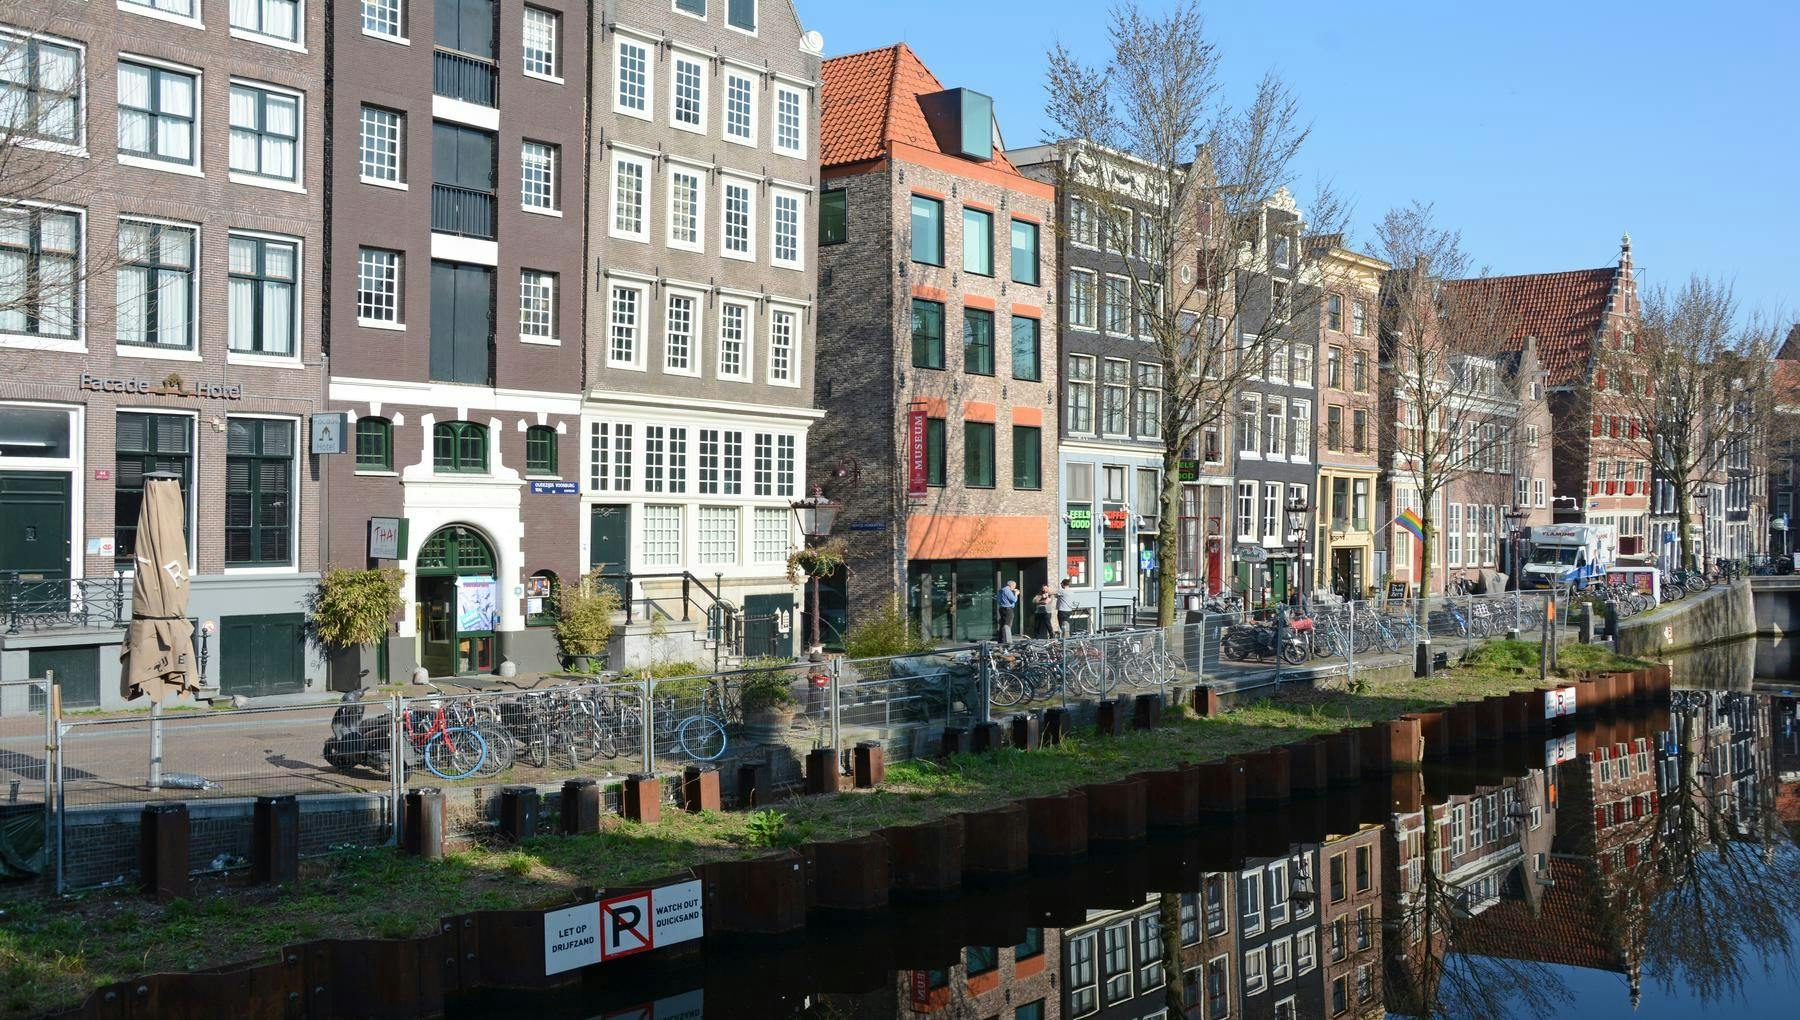 View of the Ons Lieve Heer op Solder building over a canal